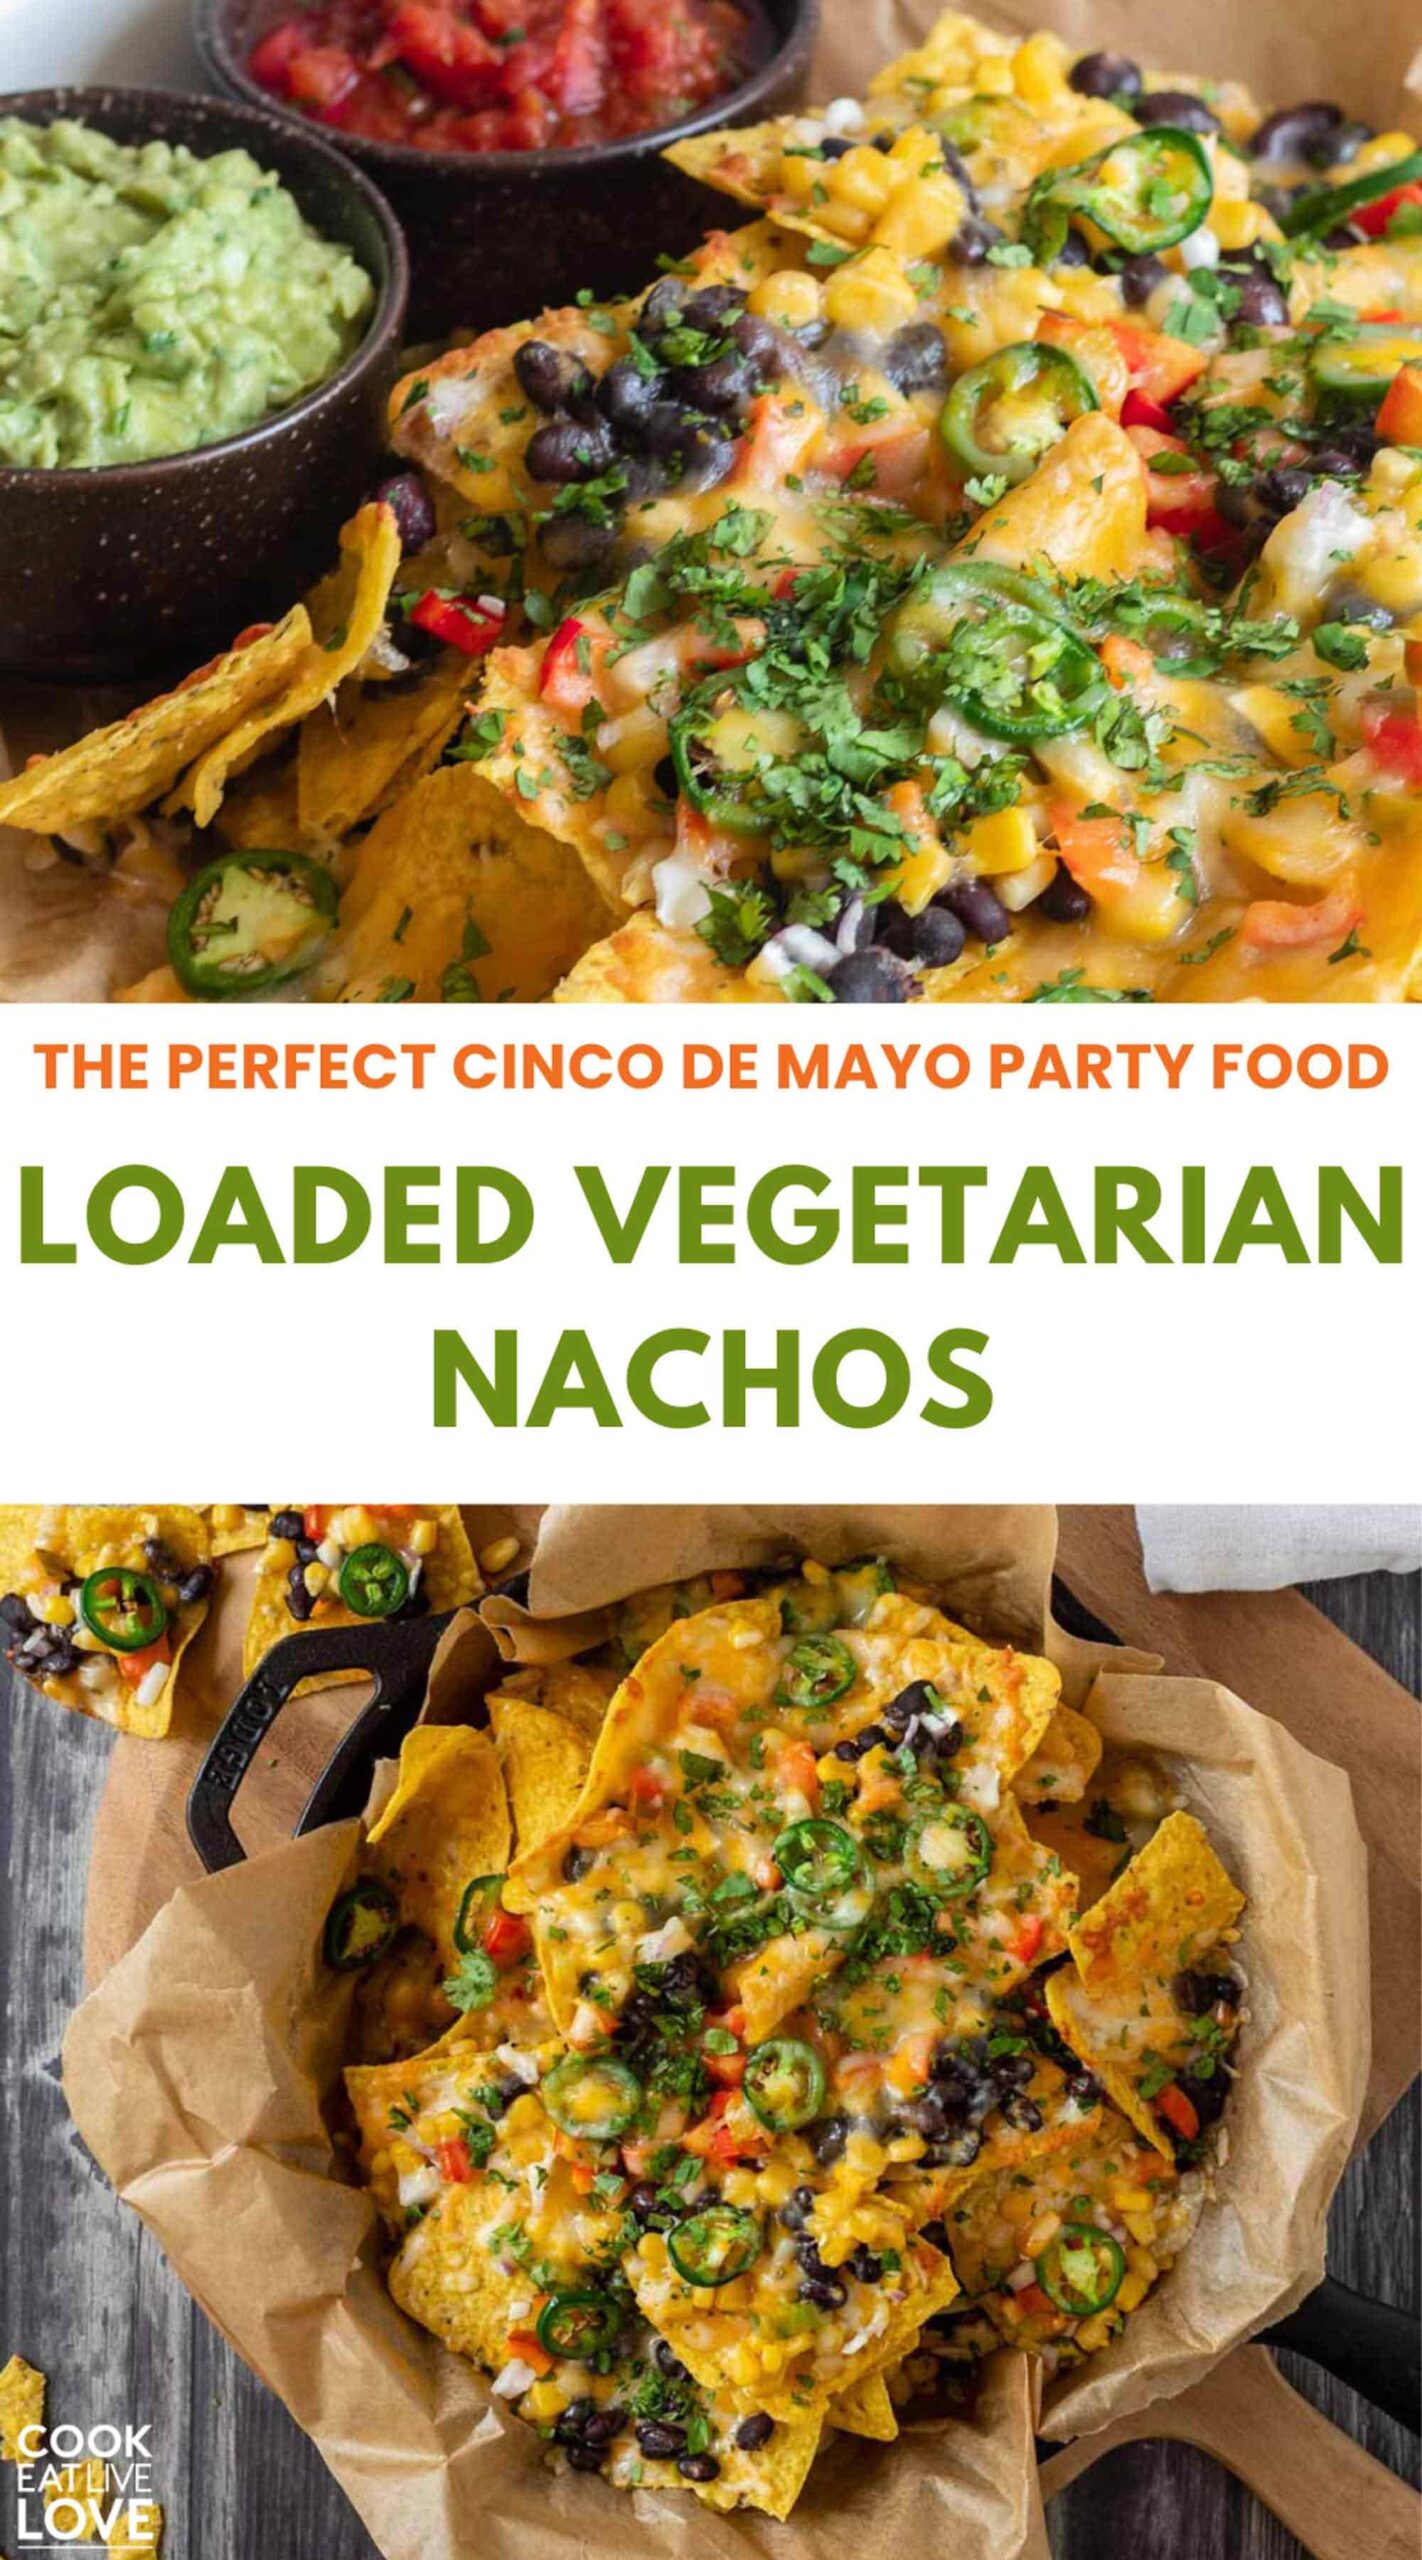 Pin for pinterest graphic with images of nachos and text on top.